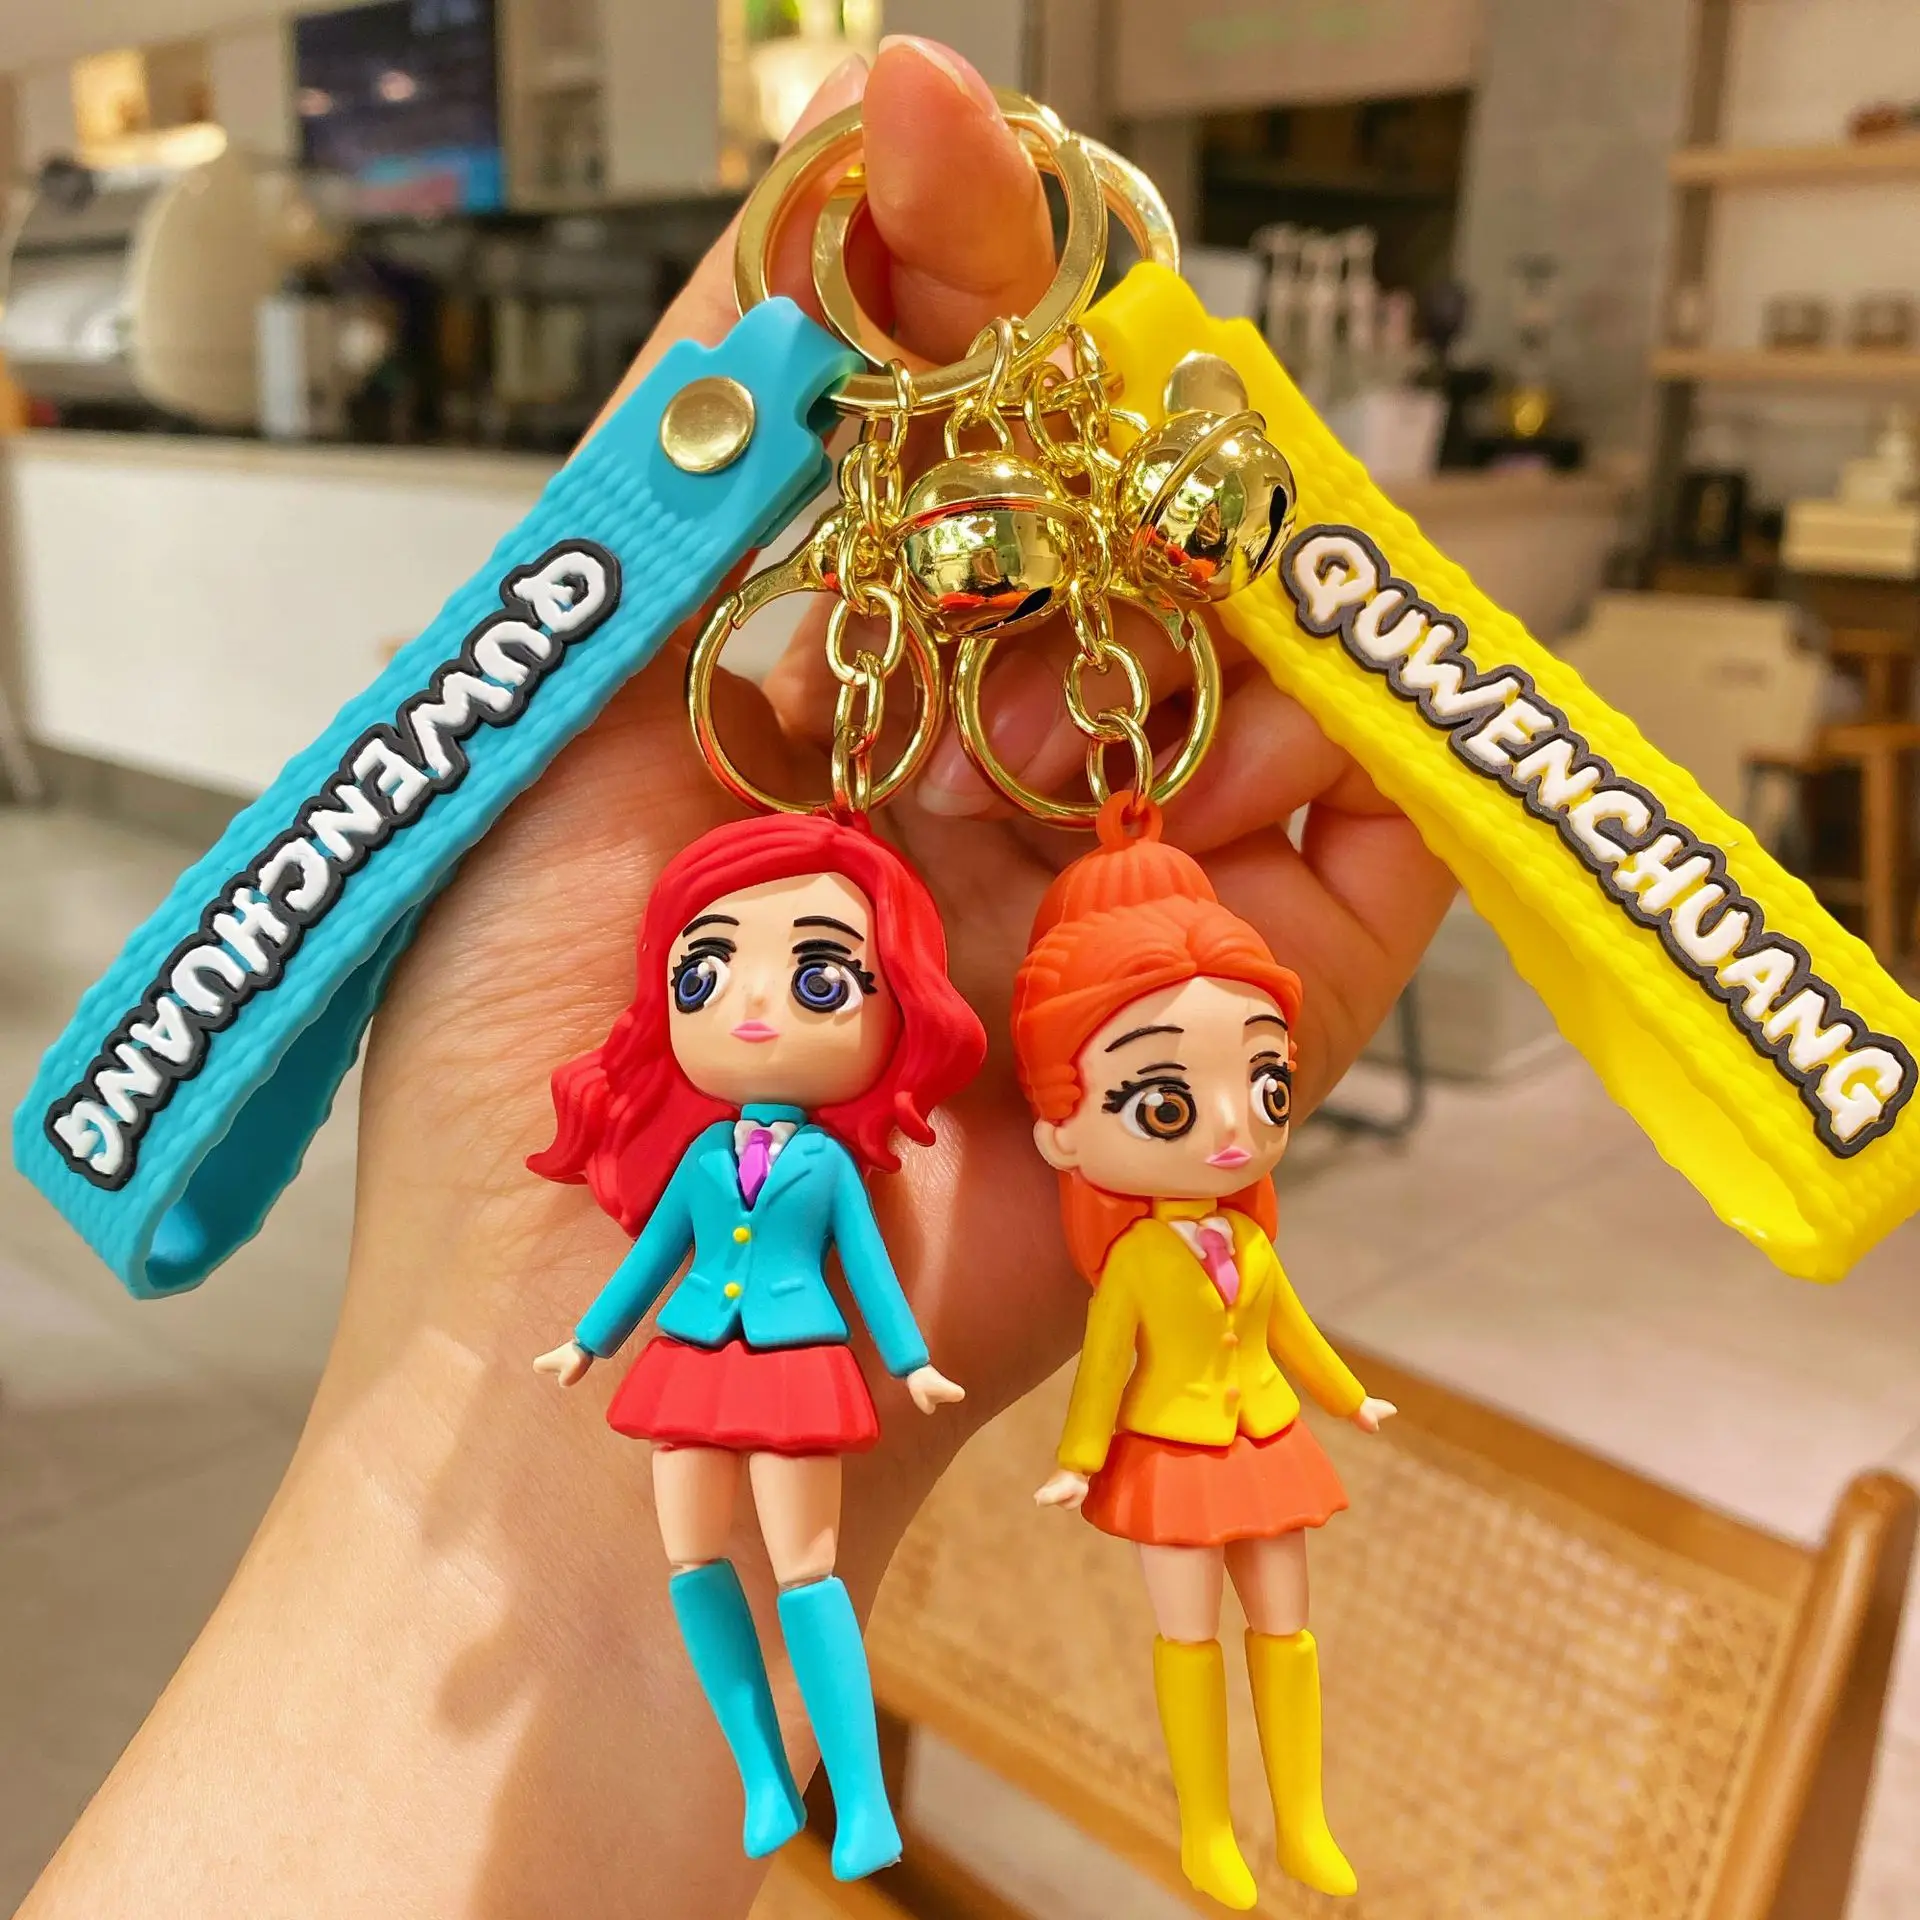 New Cartoon exquisite suit girl pendant doll key chain doll Car pendant Girl gift silicone Dress up girl keychain key chain